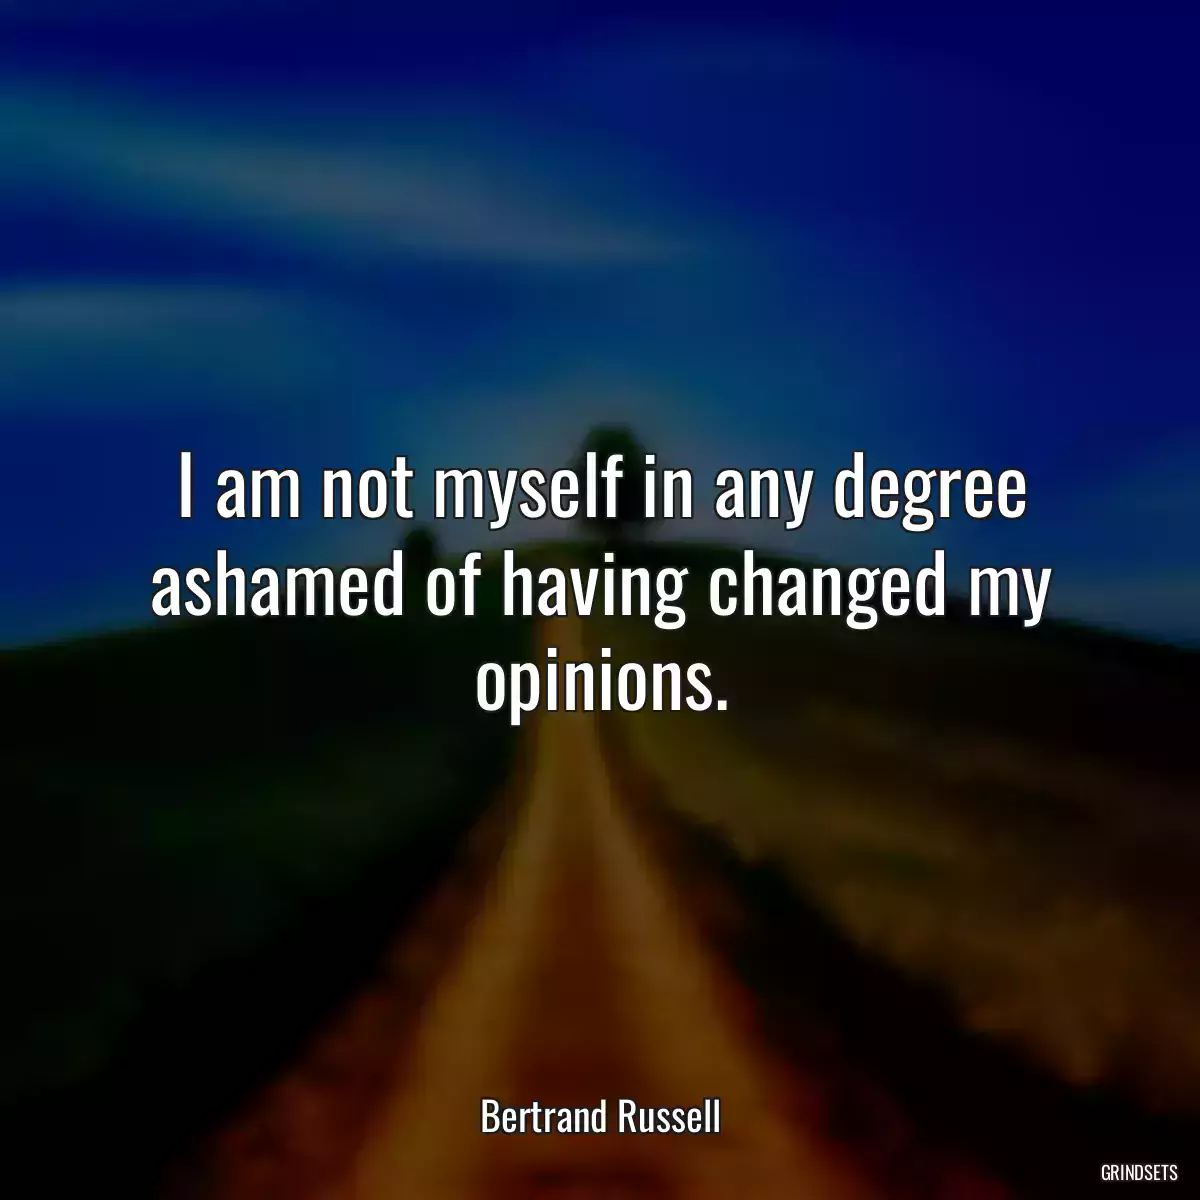 I am not myself in any degree ashamed of having changed my opinions.